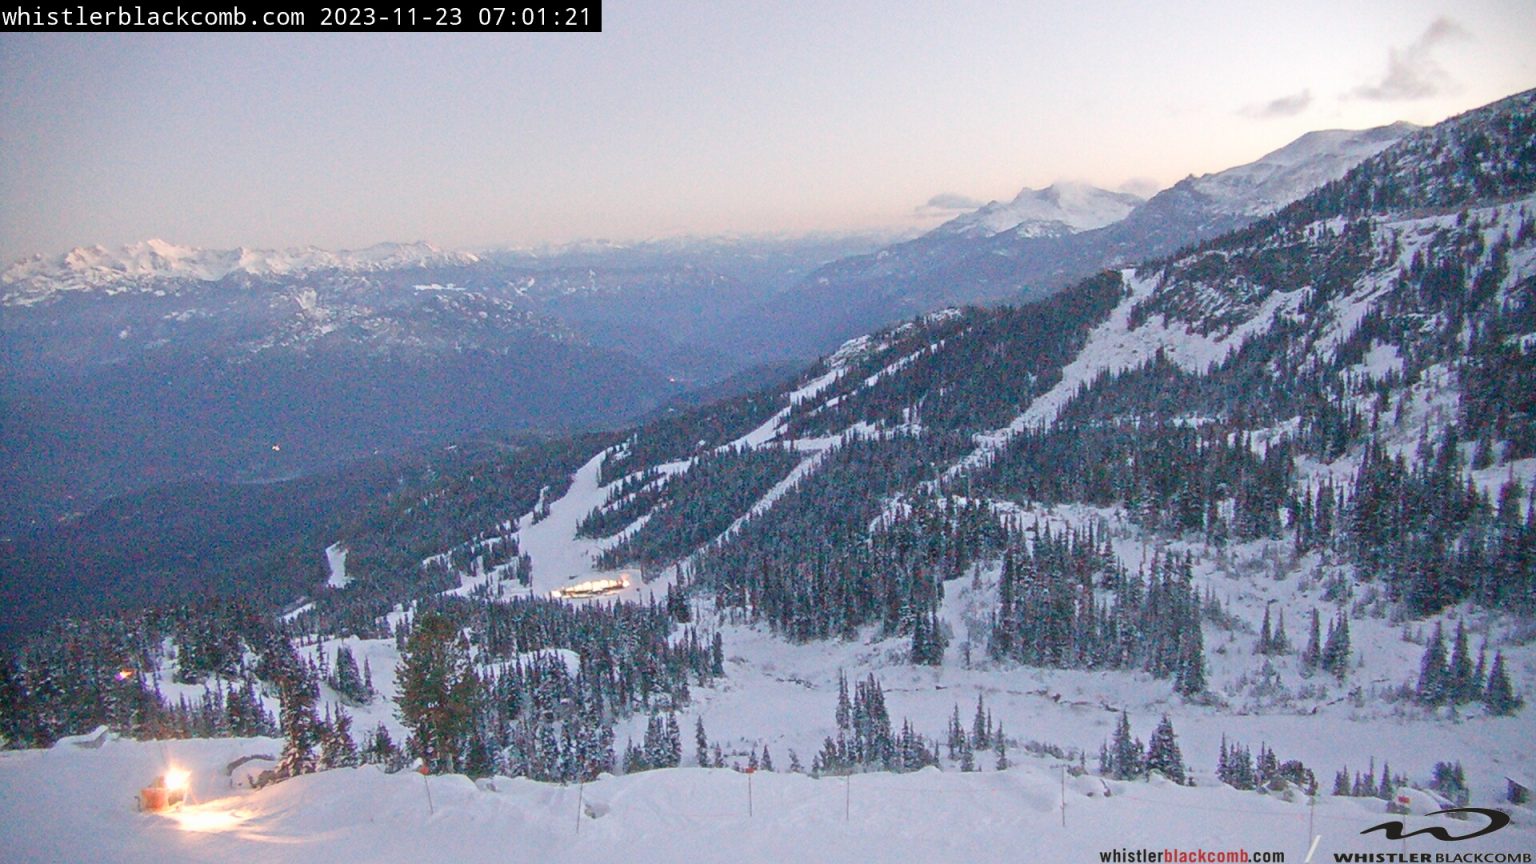 Not a snowy start to the season for Whistler Blackcomb